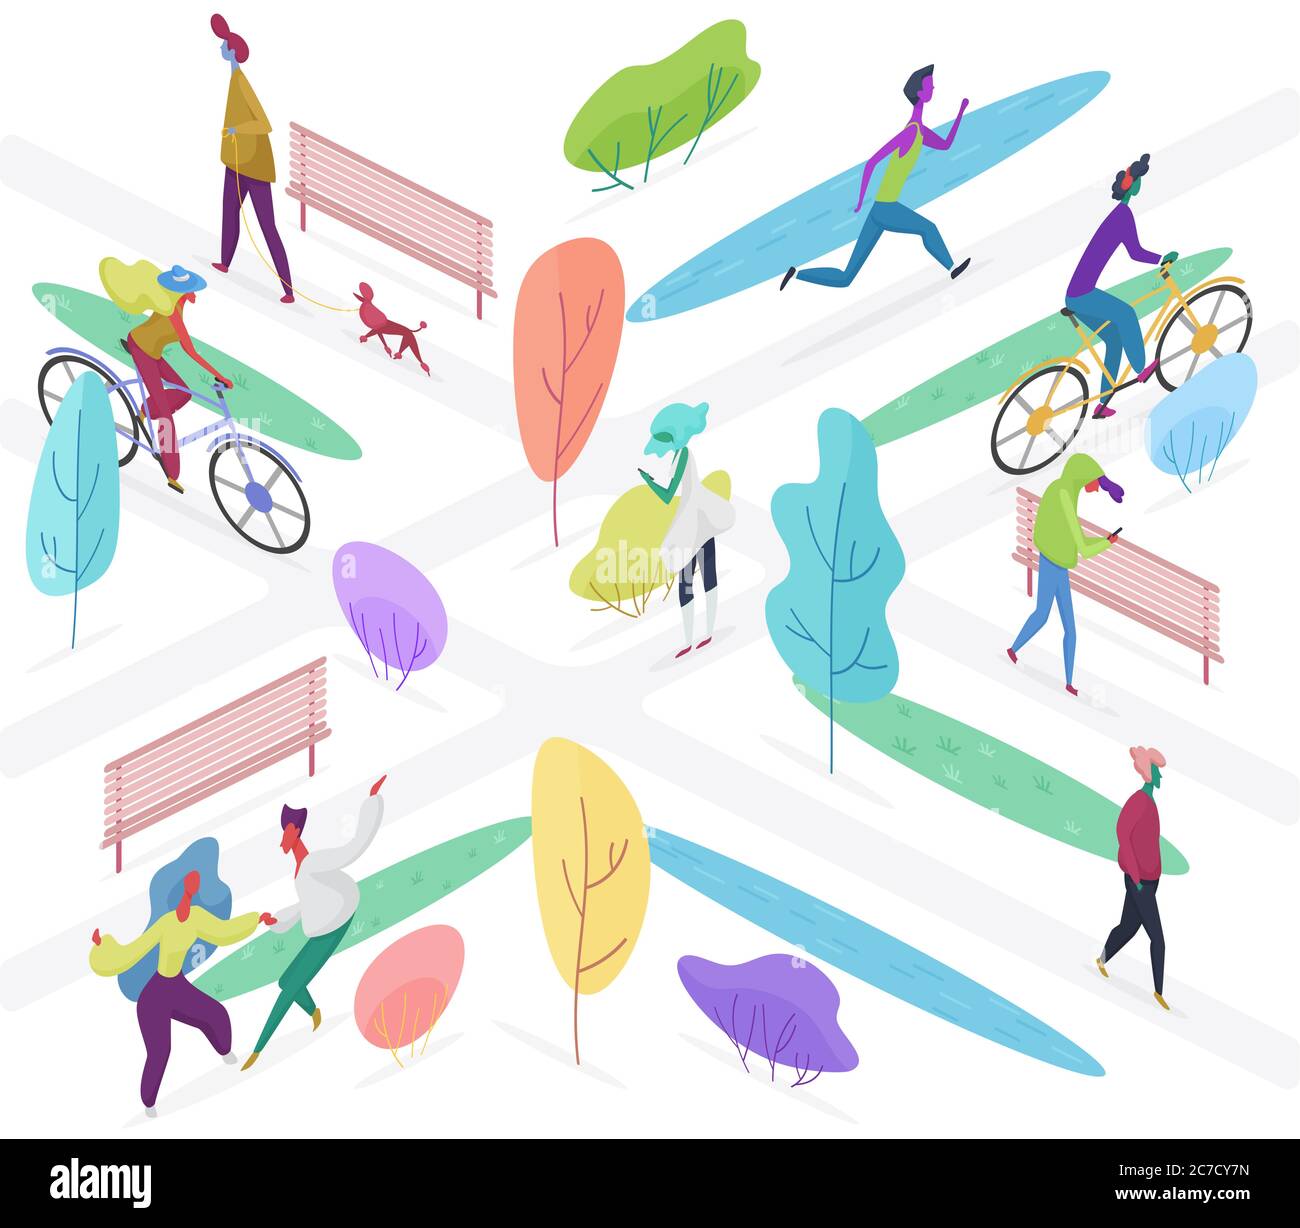 Isomeric people outdoor activity in public park. Walking with dog, riding bicycle and walking alone vector illustration Stock Vector